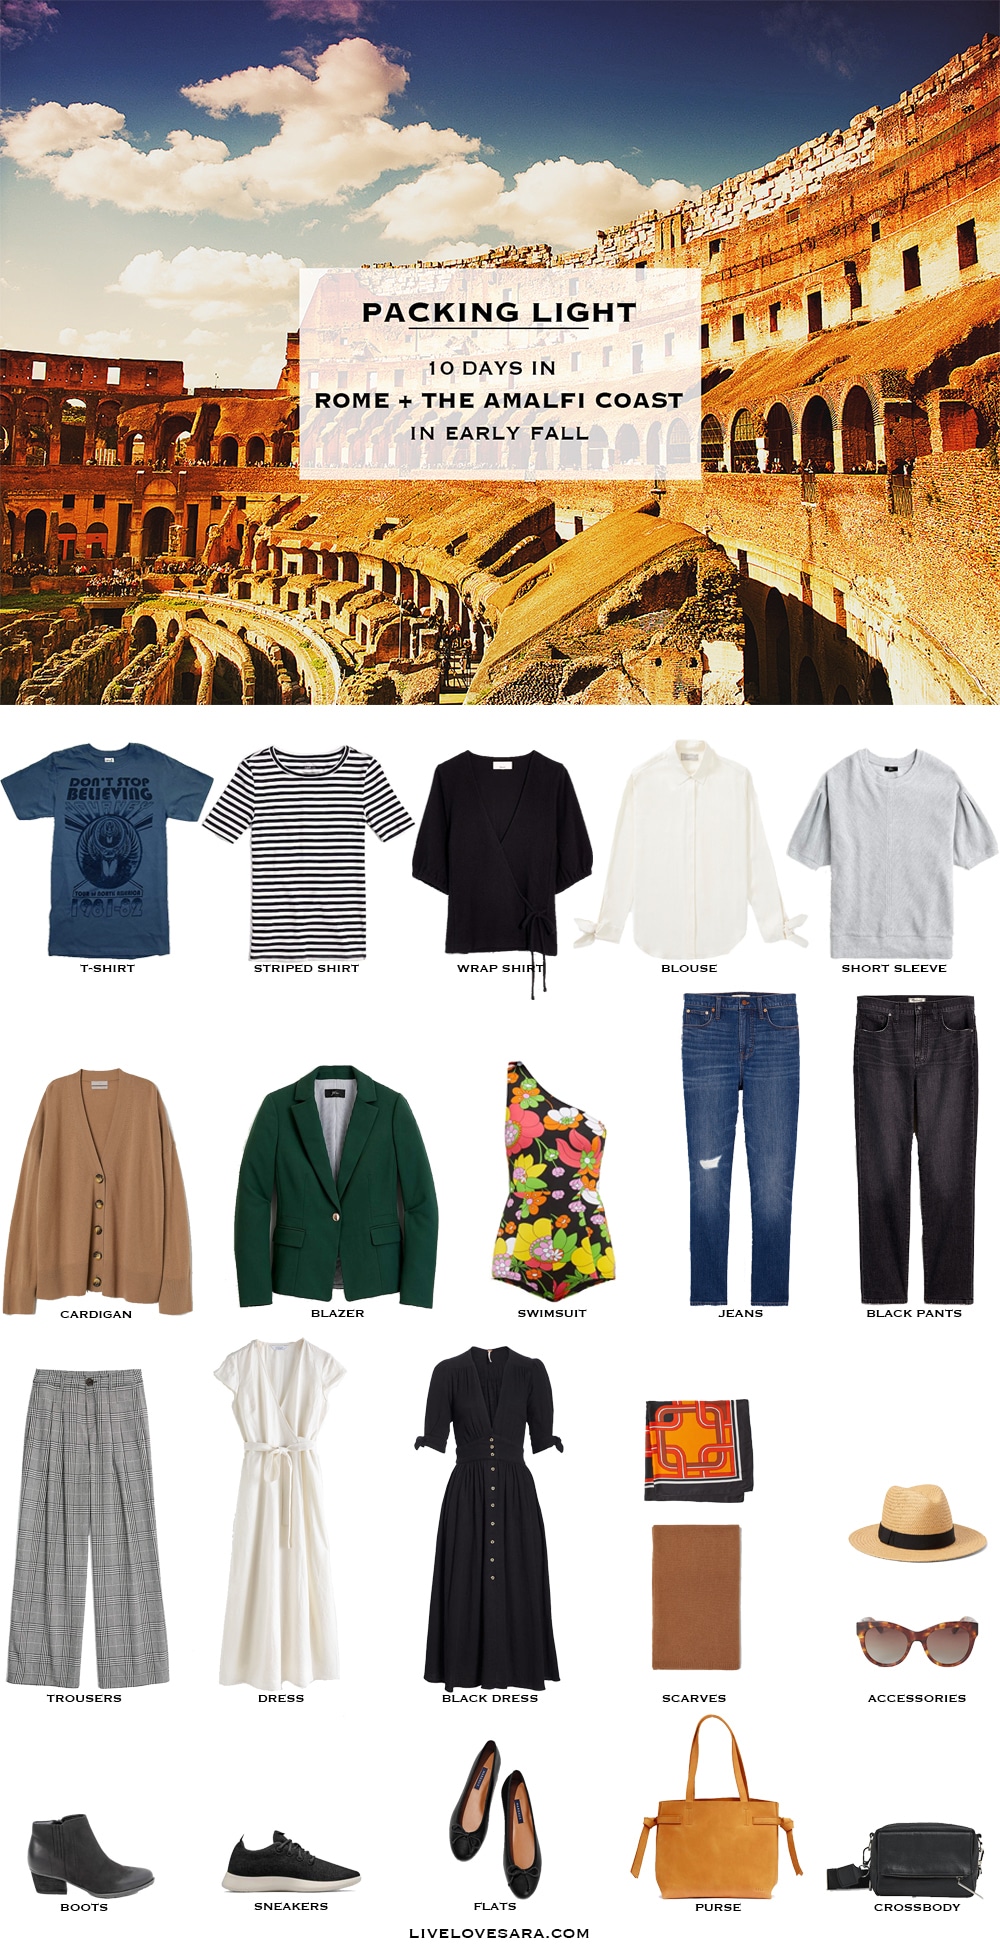 What to pack for Rome packing list | Amalfi Coast Packing list | Italy Packing List | Europe Packing List | Packing Light | Capsule Wardrobe | travel wardrobe | Fall packing list | travel capsule | livelovesara